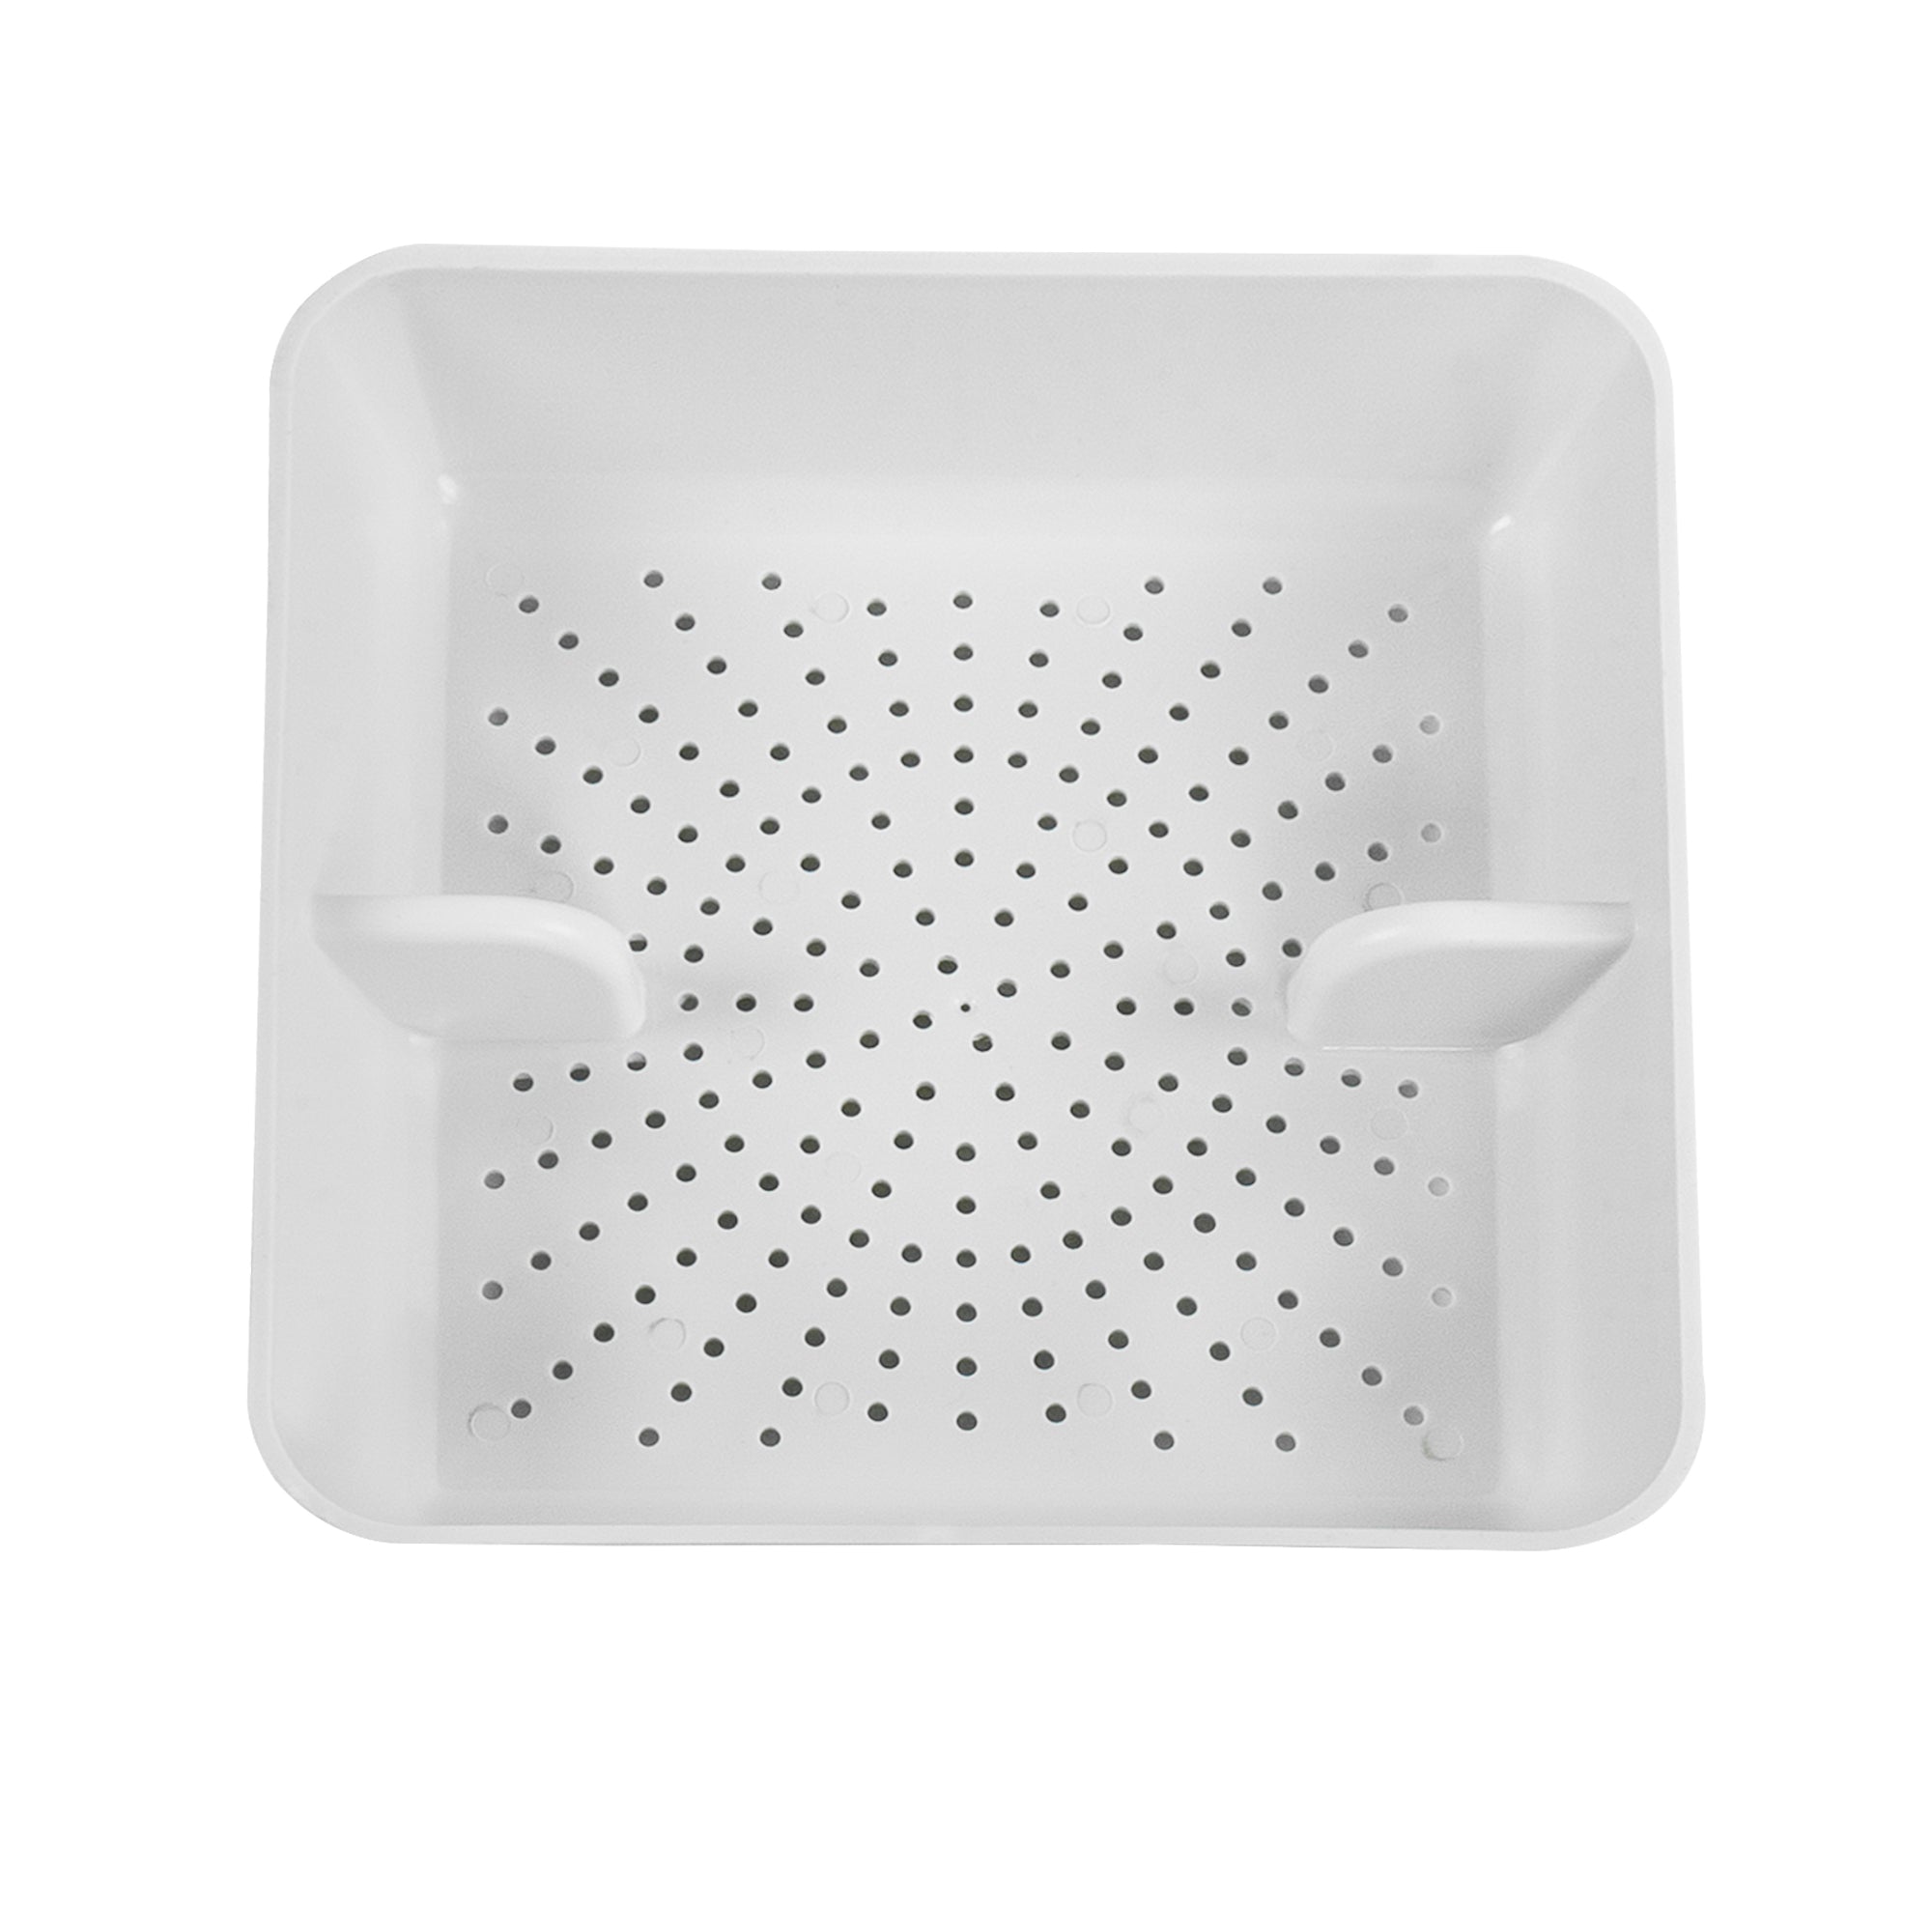 Leyso Floor Sink Drain Strainer ABS Plastic Drop-in Basket 8-1/2" x 8-1/2" x 2-1/4" - Perfect for Restaurant, Bar, Buffet